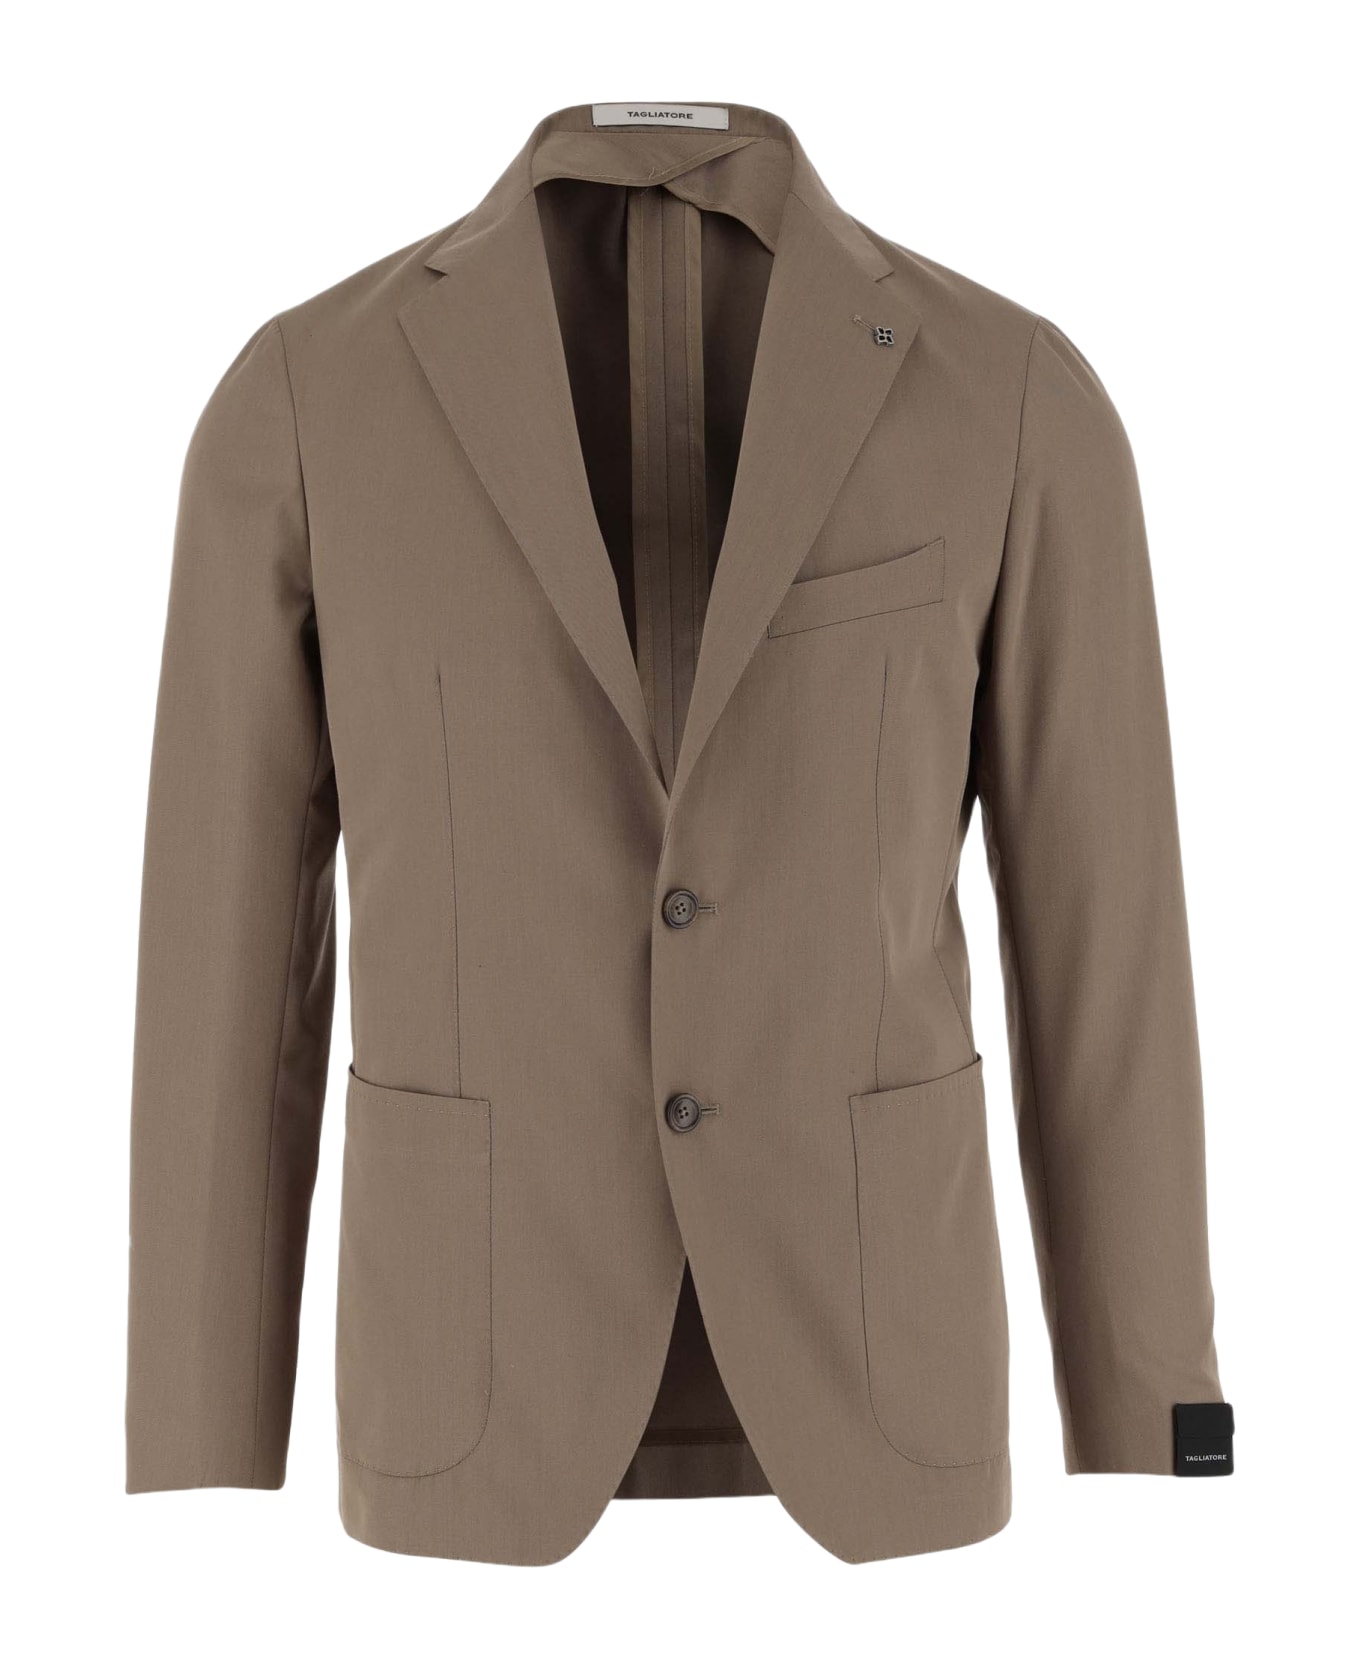 Tagliatore Single-breasted Cotton And Wool Jacket - Beige ブレザー